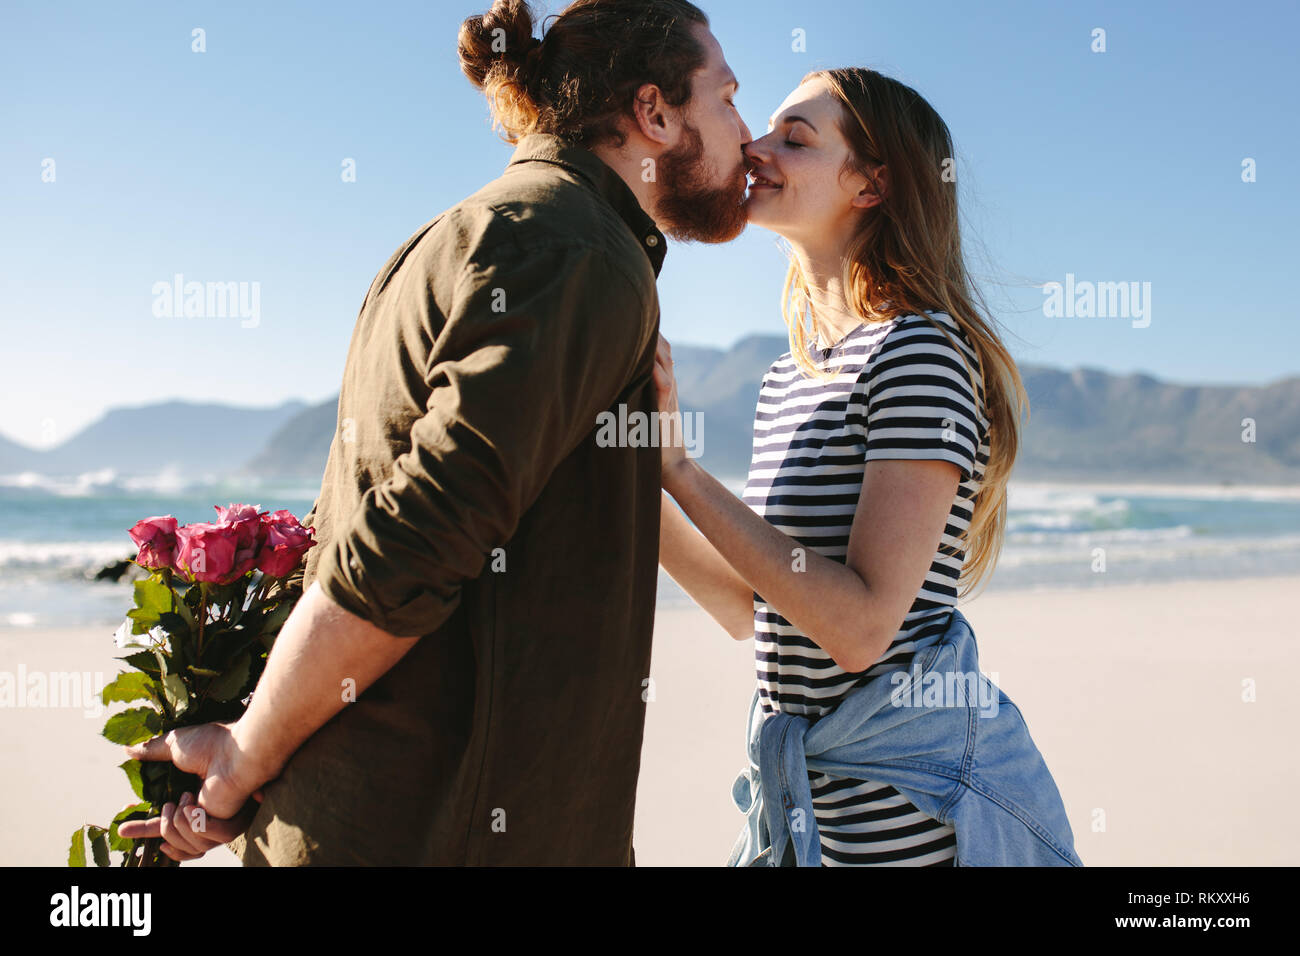 Man holding flowers behind and kissing his girlfriend on the beach. Couple in love kissing on the beach. Stock Photo